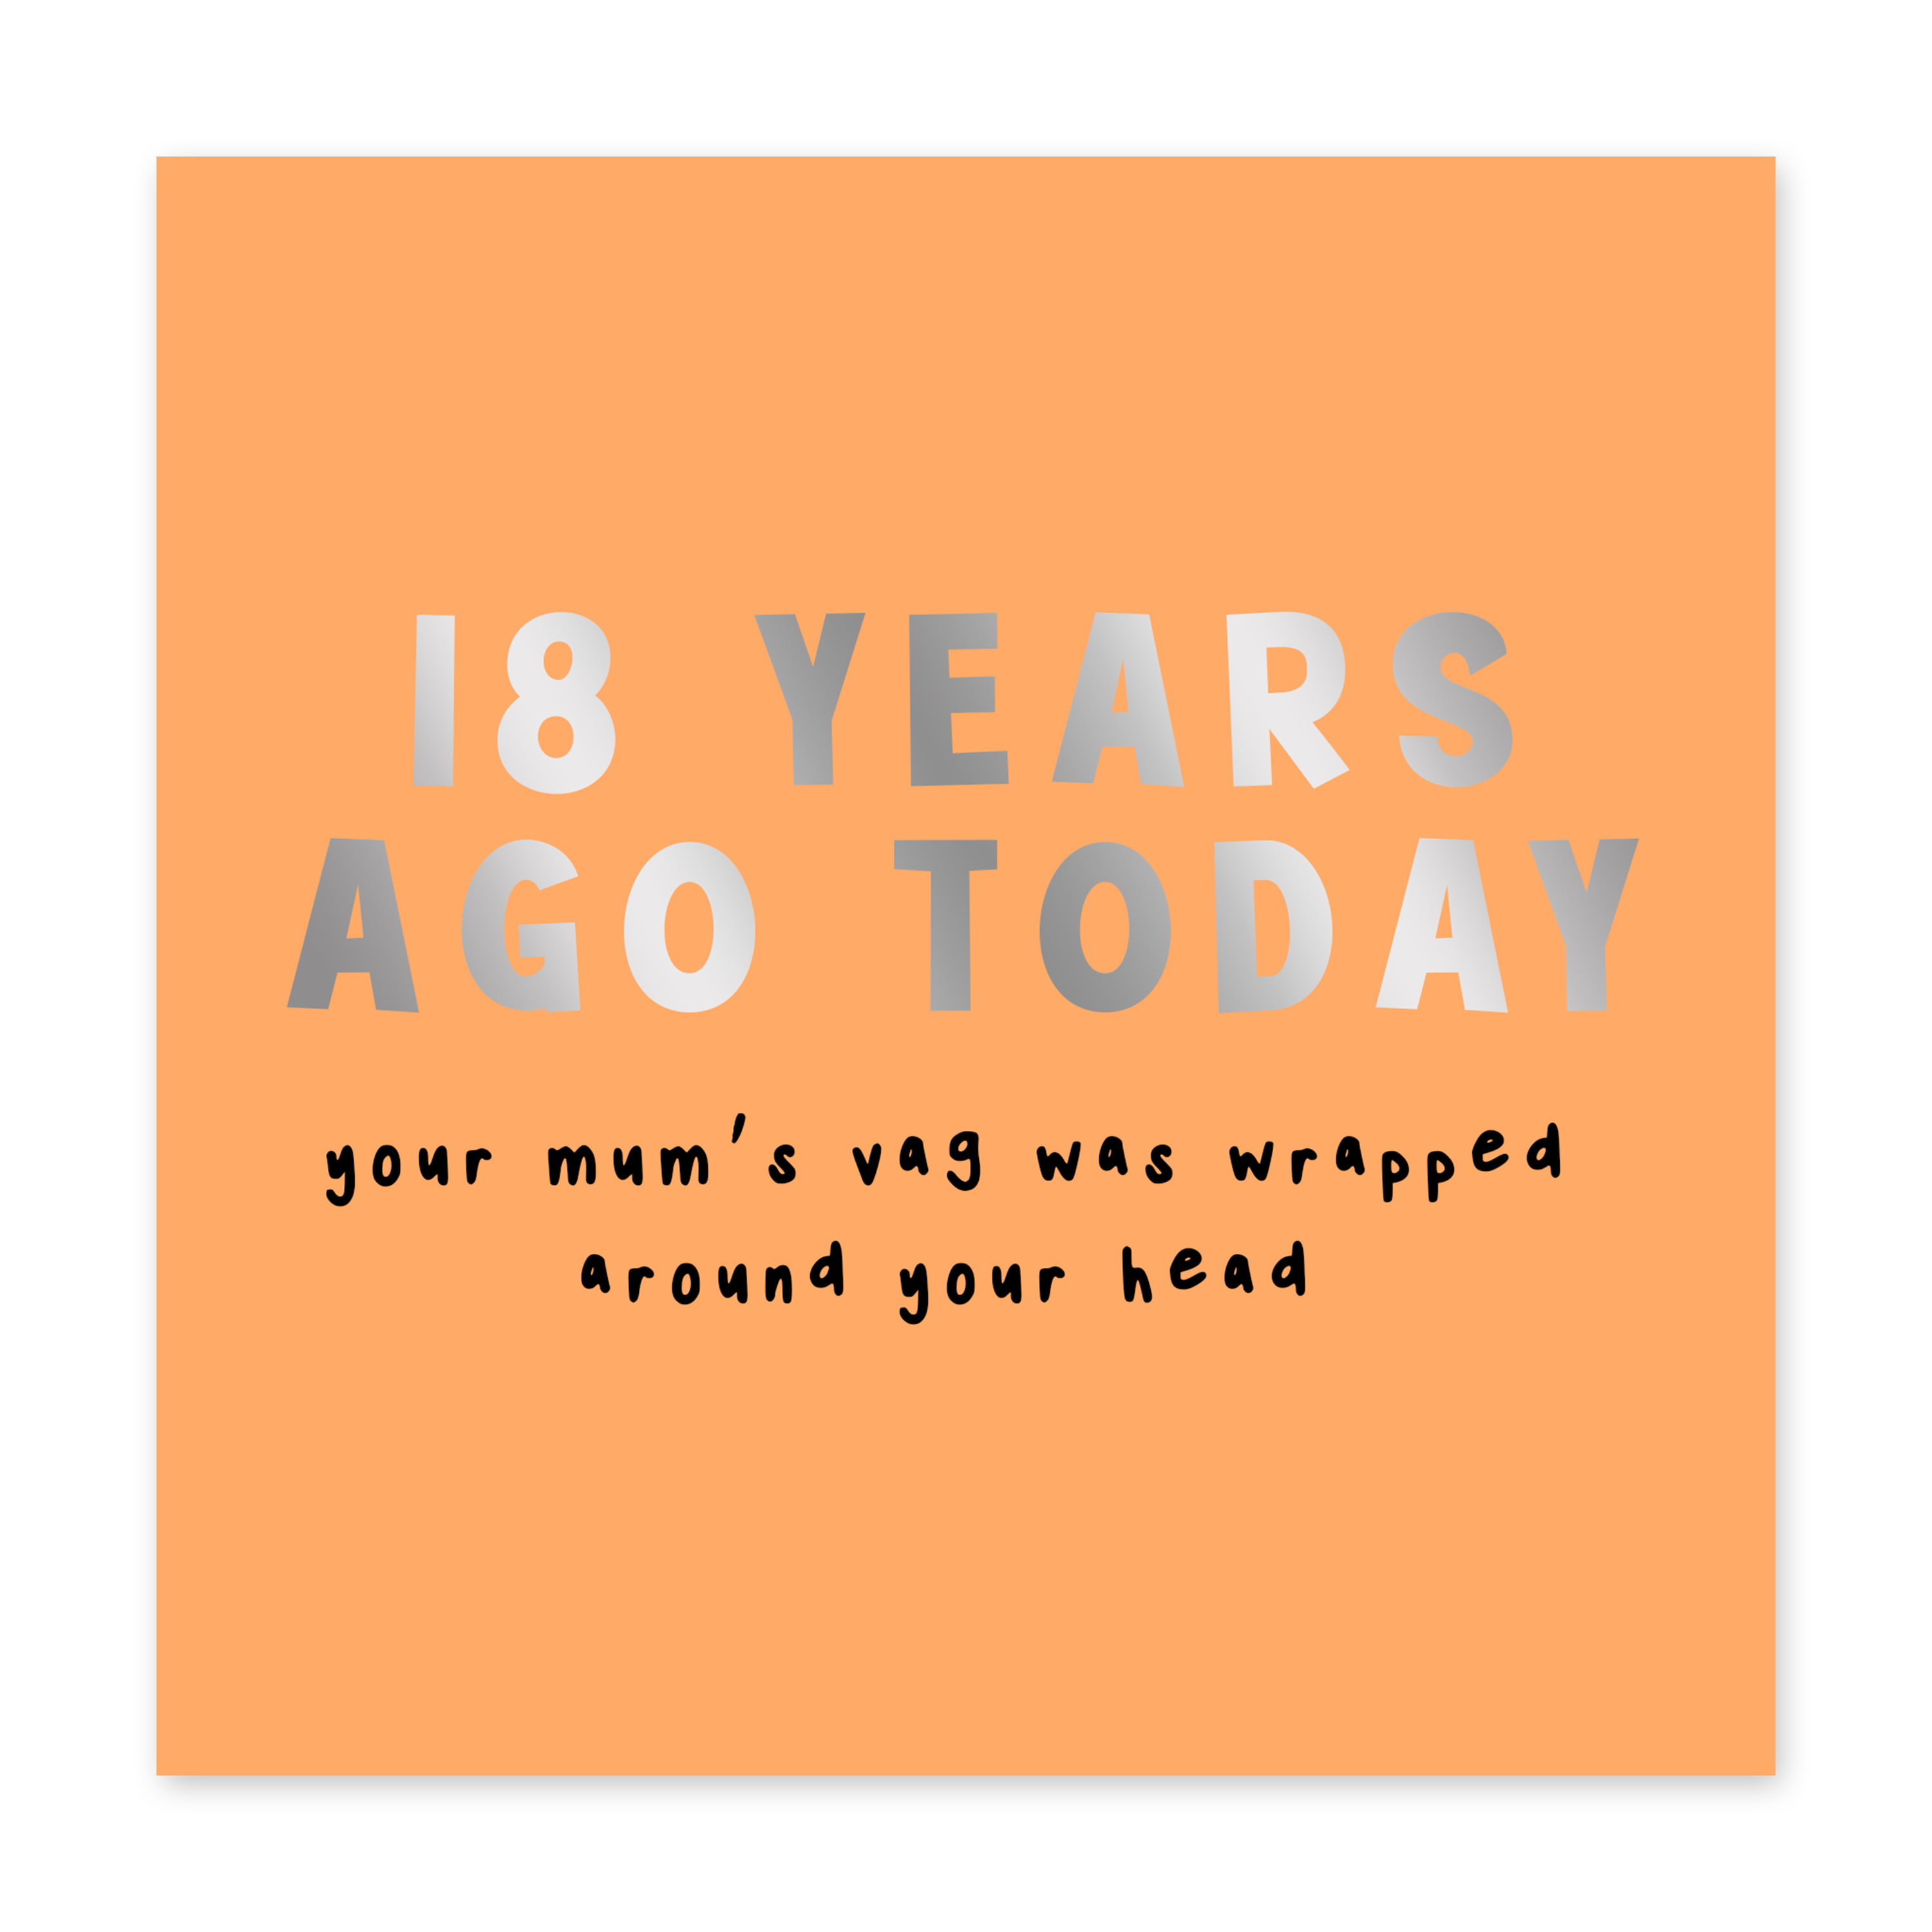 Central 23 - Funny 18th Birthday Card for Him - '18 Years Ago Today' -  Cheeky Birthday Card for Her - Son Birthday Card - Daughter Birthday Card -  Comes with Fun Stickers 